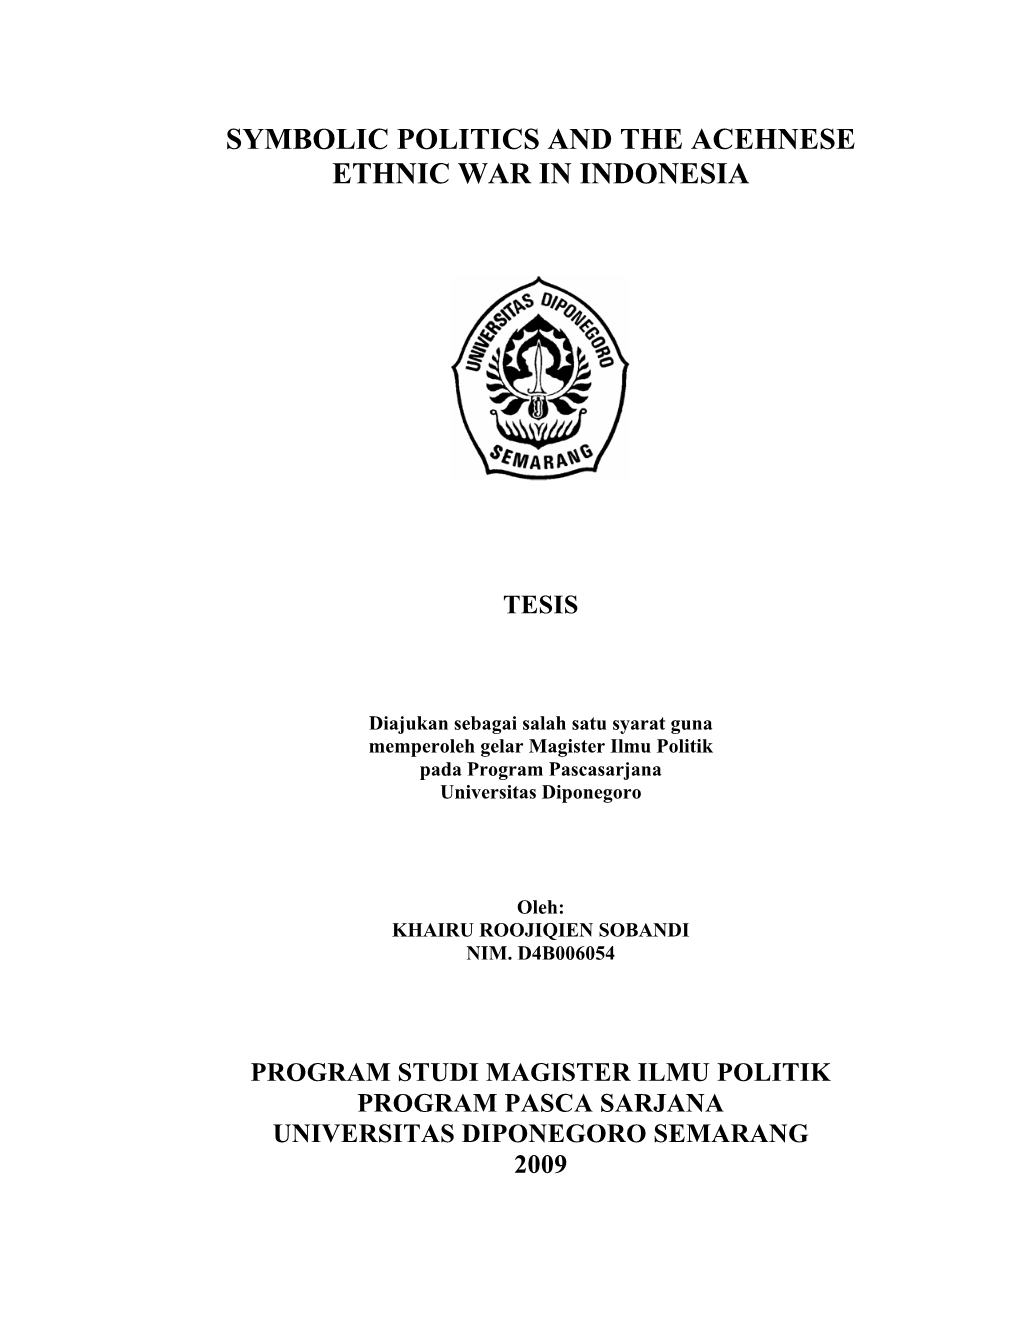 Symbolic Politics and the Acehnese Ethnic War in Indonesia